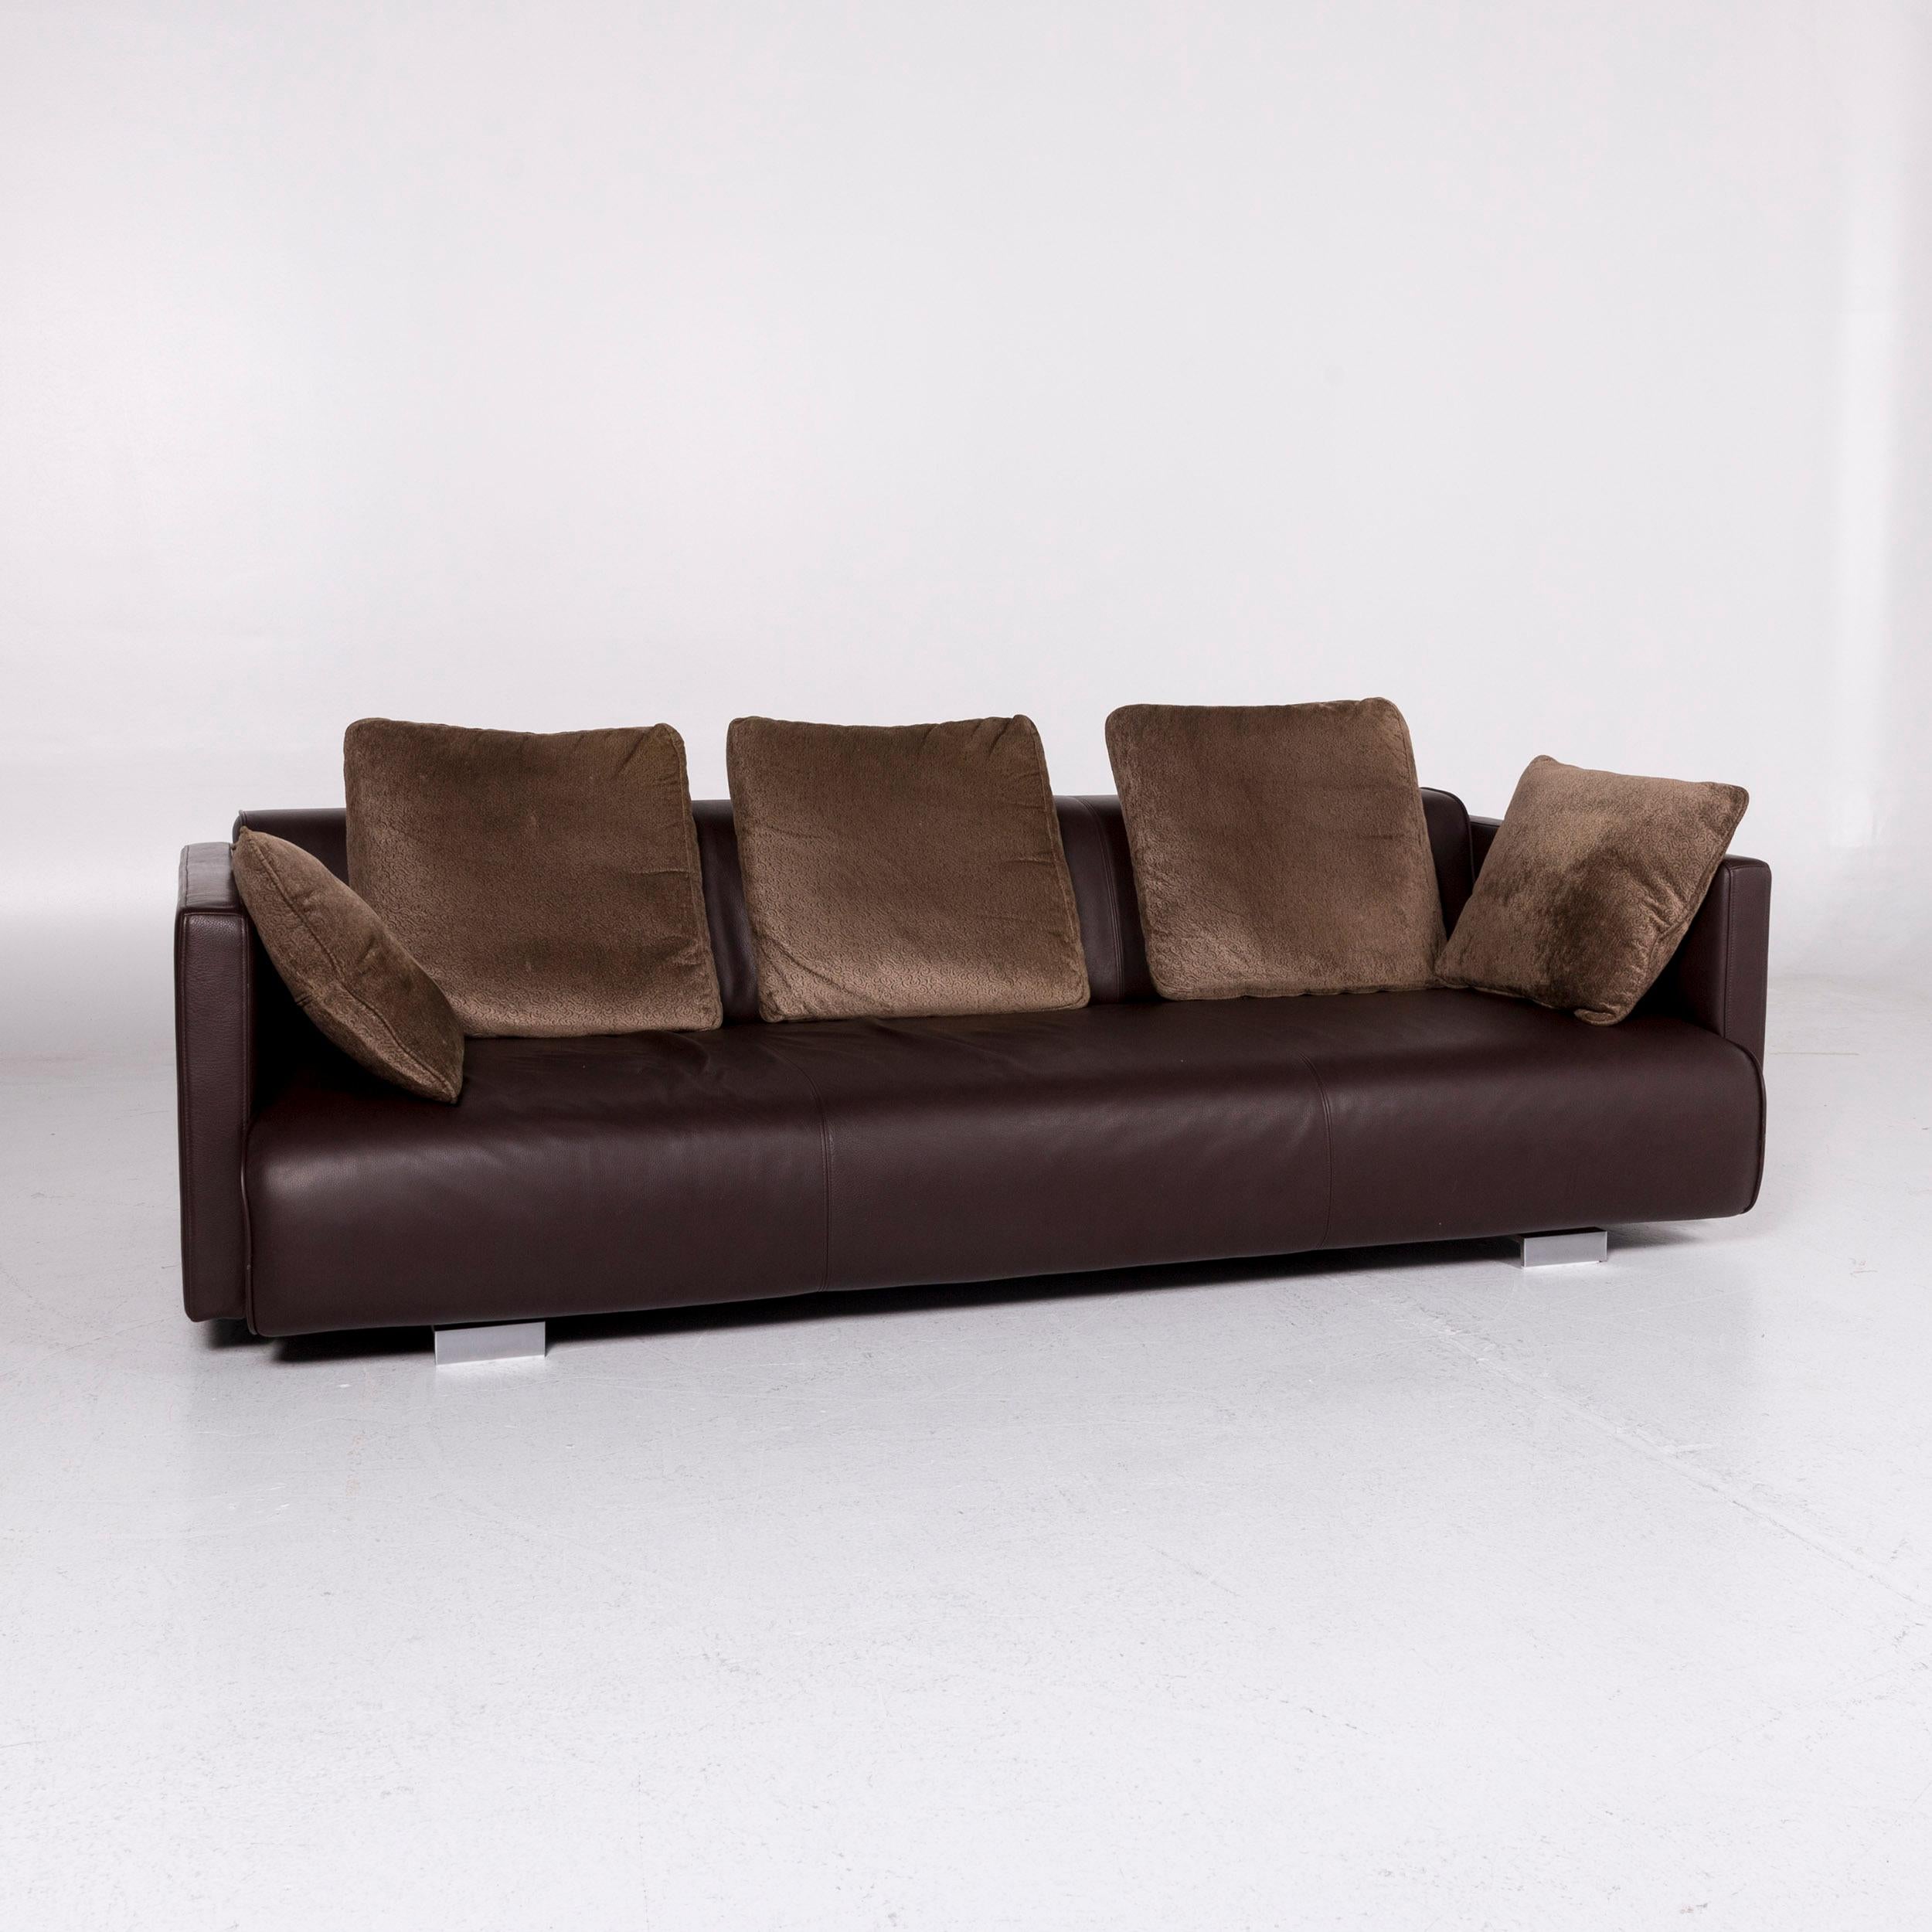 We bring to you a Rolf Benz 6300 leather sofa brown dark brown incl. Cushion three-seat couch.
 
 Product measurements in centimeters:
 
Depth 120
Width 250
Height 70
Seat-height 30
Rest-height 64
Seat-depth 72
Seat-width 178
Back-height